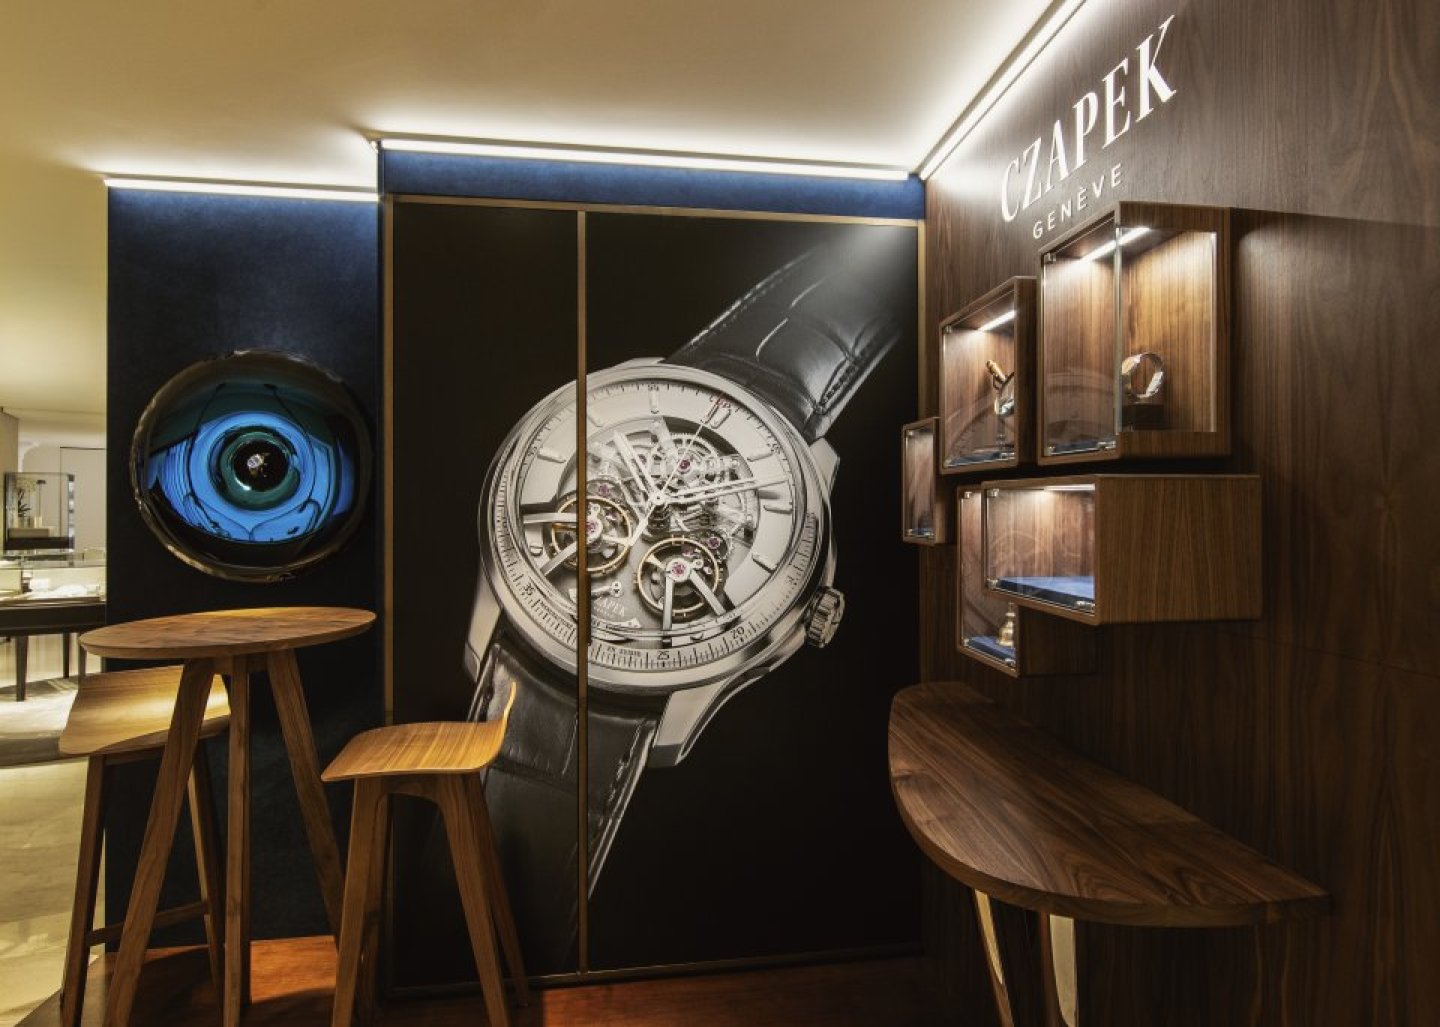 Czapek & Cie.チャペックが光の街パリへ帰還～ Back to Paris, the City of Lights